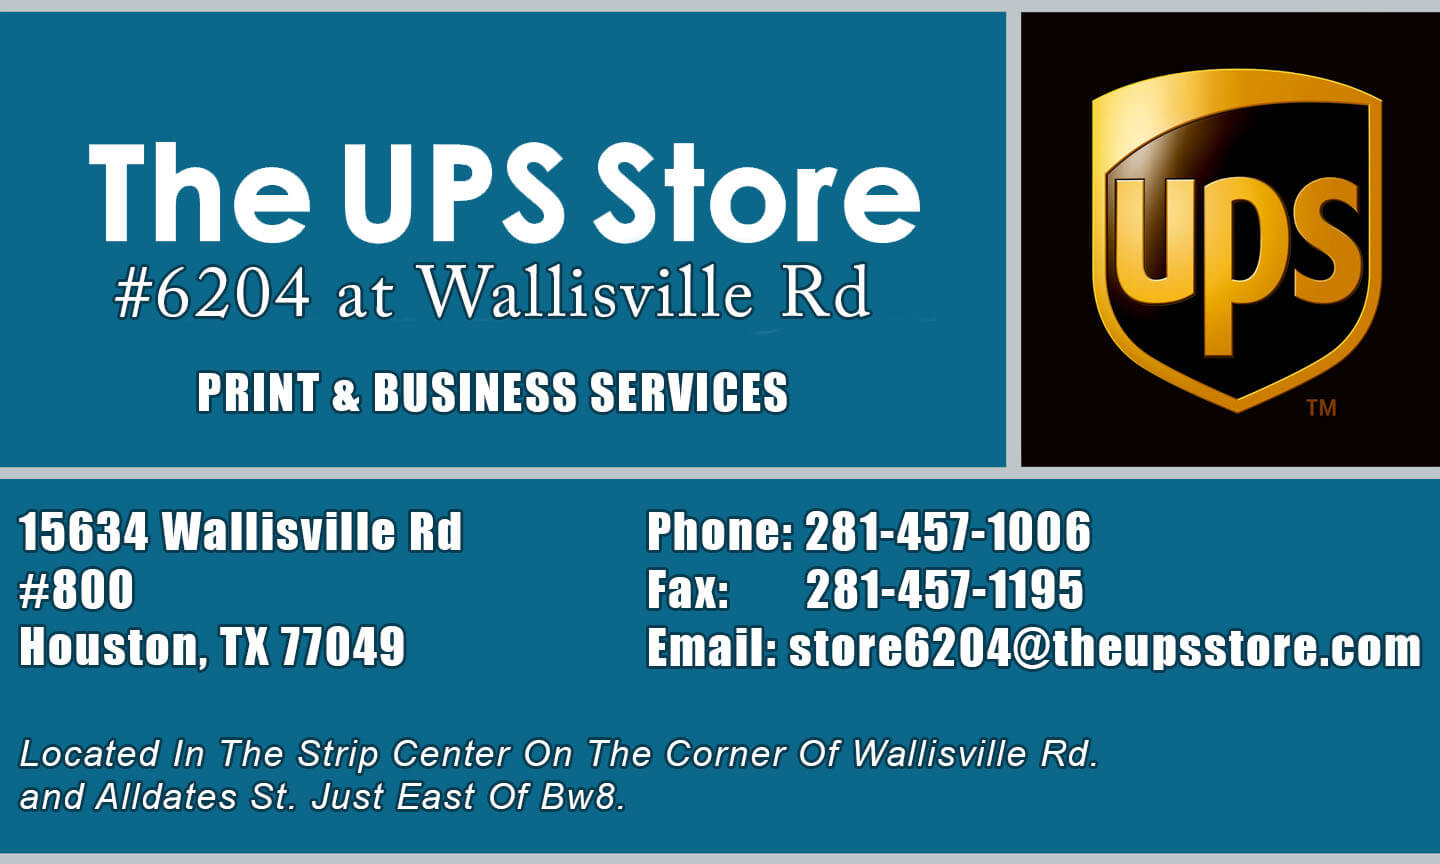 The UPS Store #6204